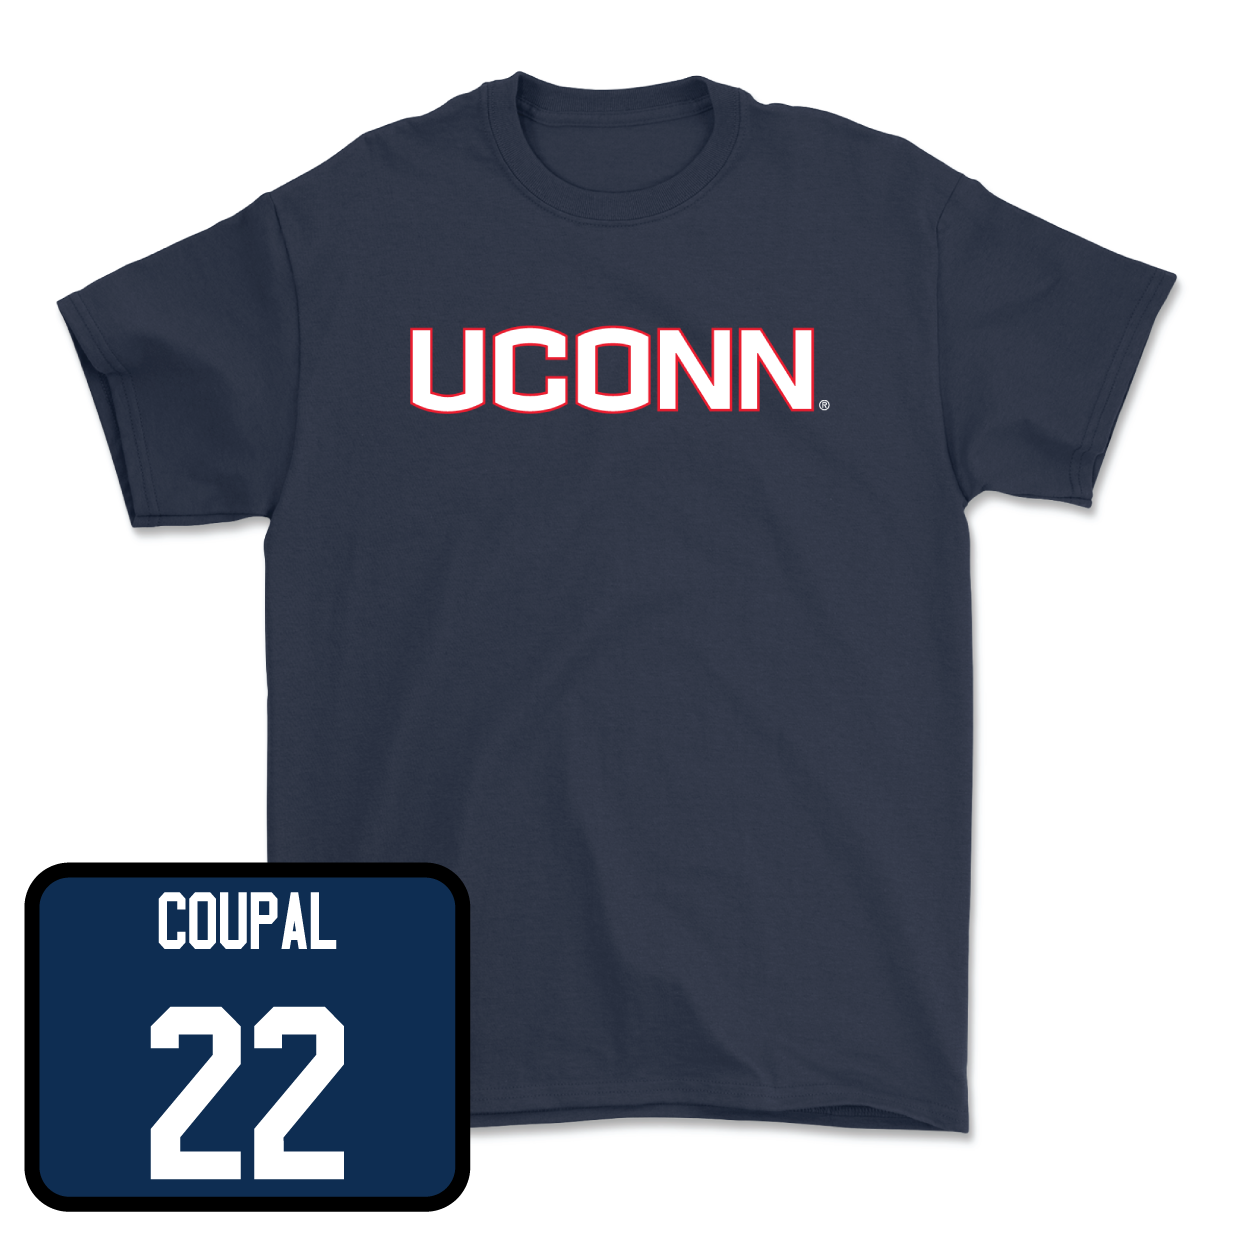 Navy Women's Track & Field UConn Tee Youth Small / Megan Minicucci